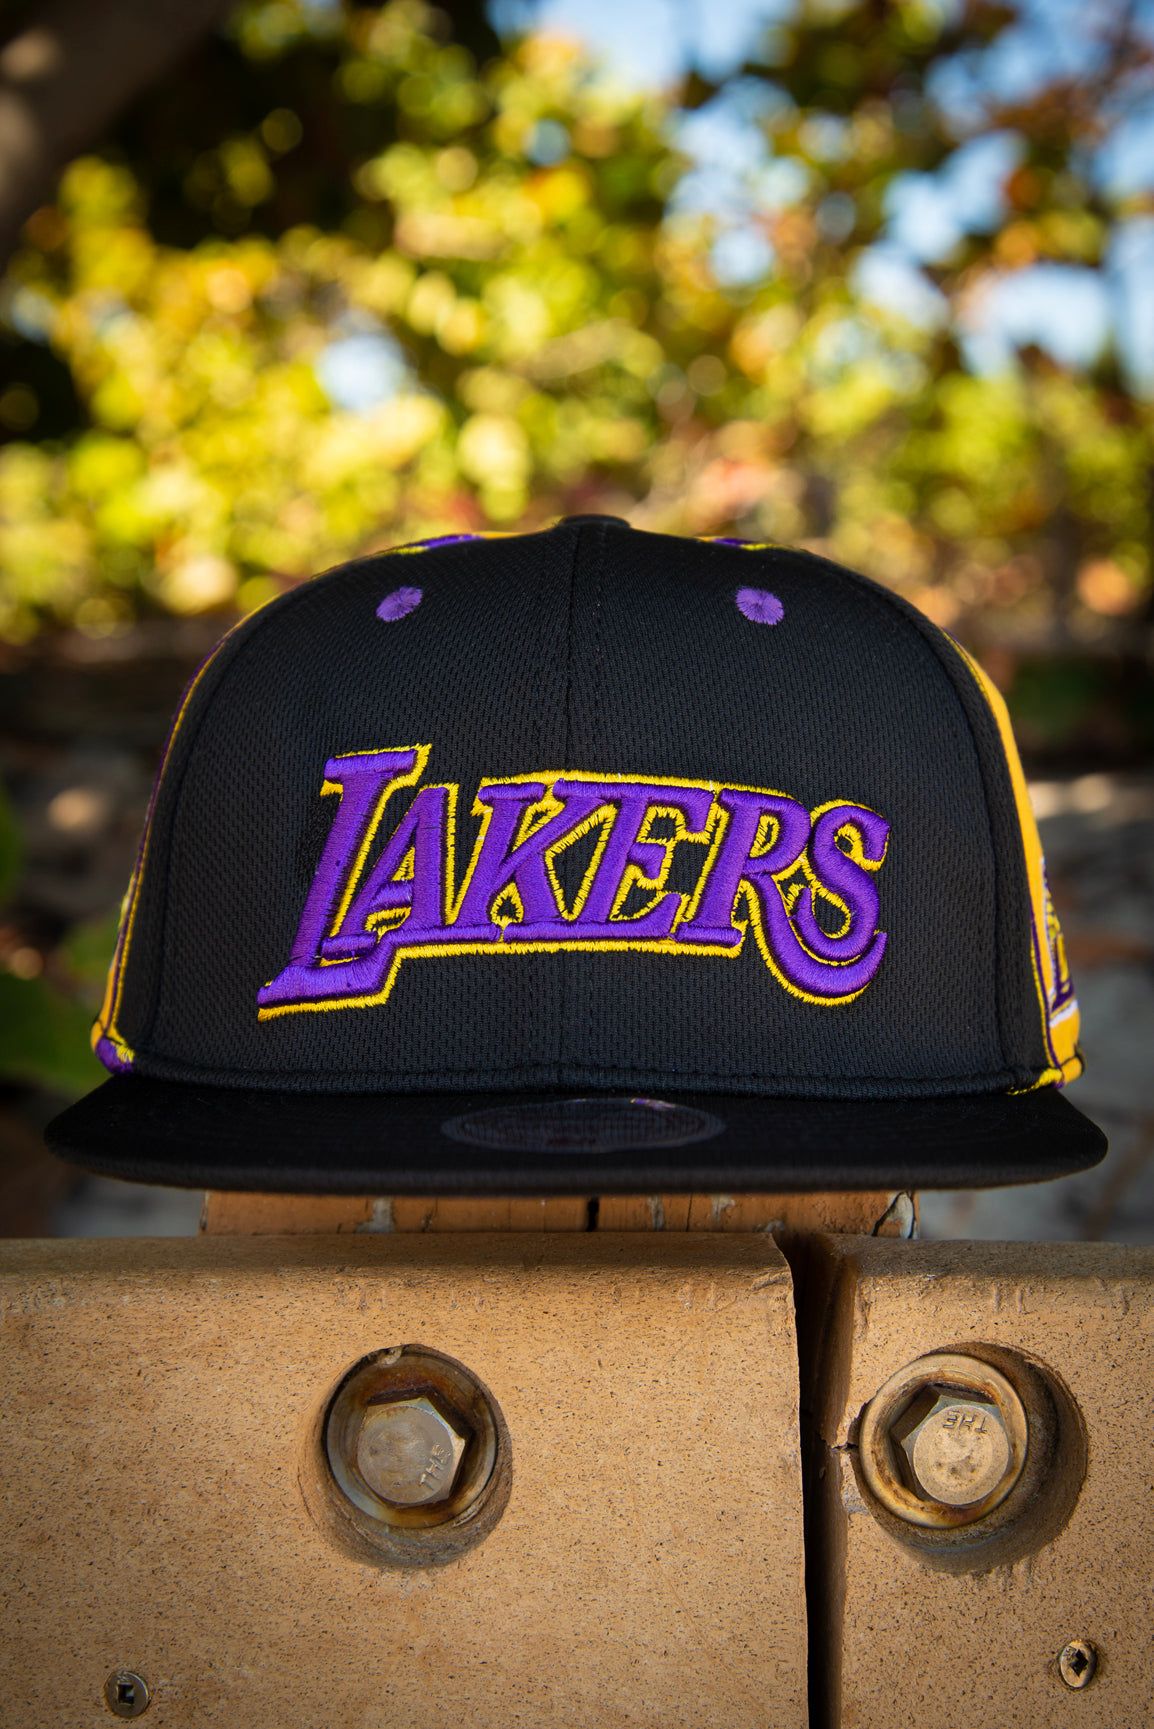  Mitchell & Ness Los Angeles Lakers Snapback Hat